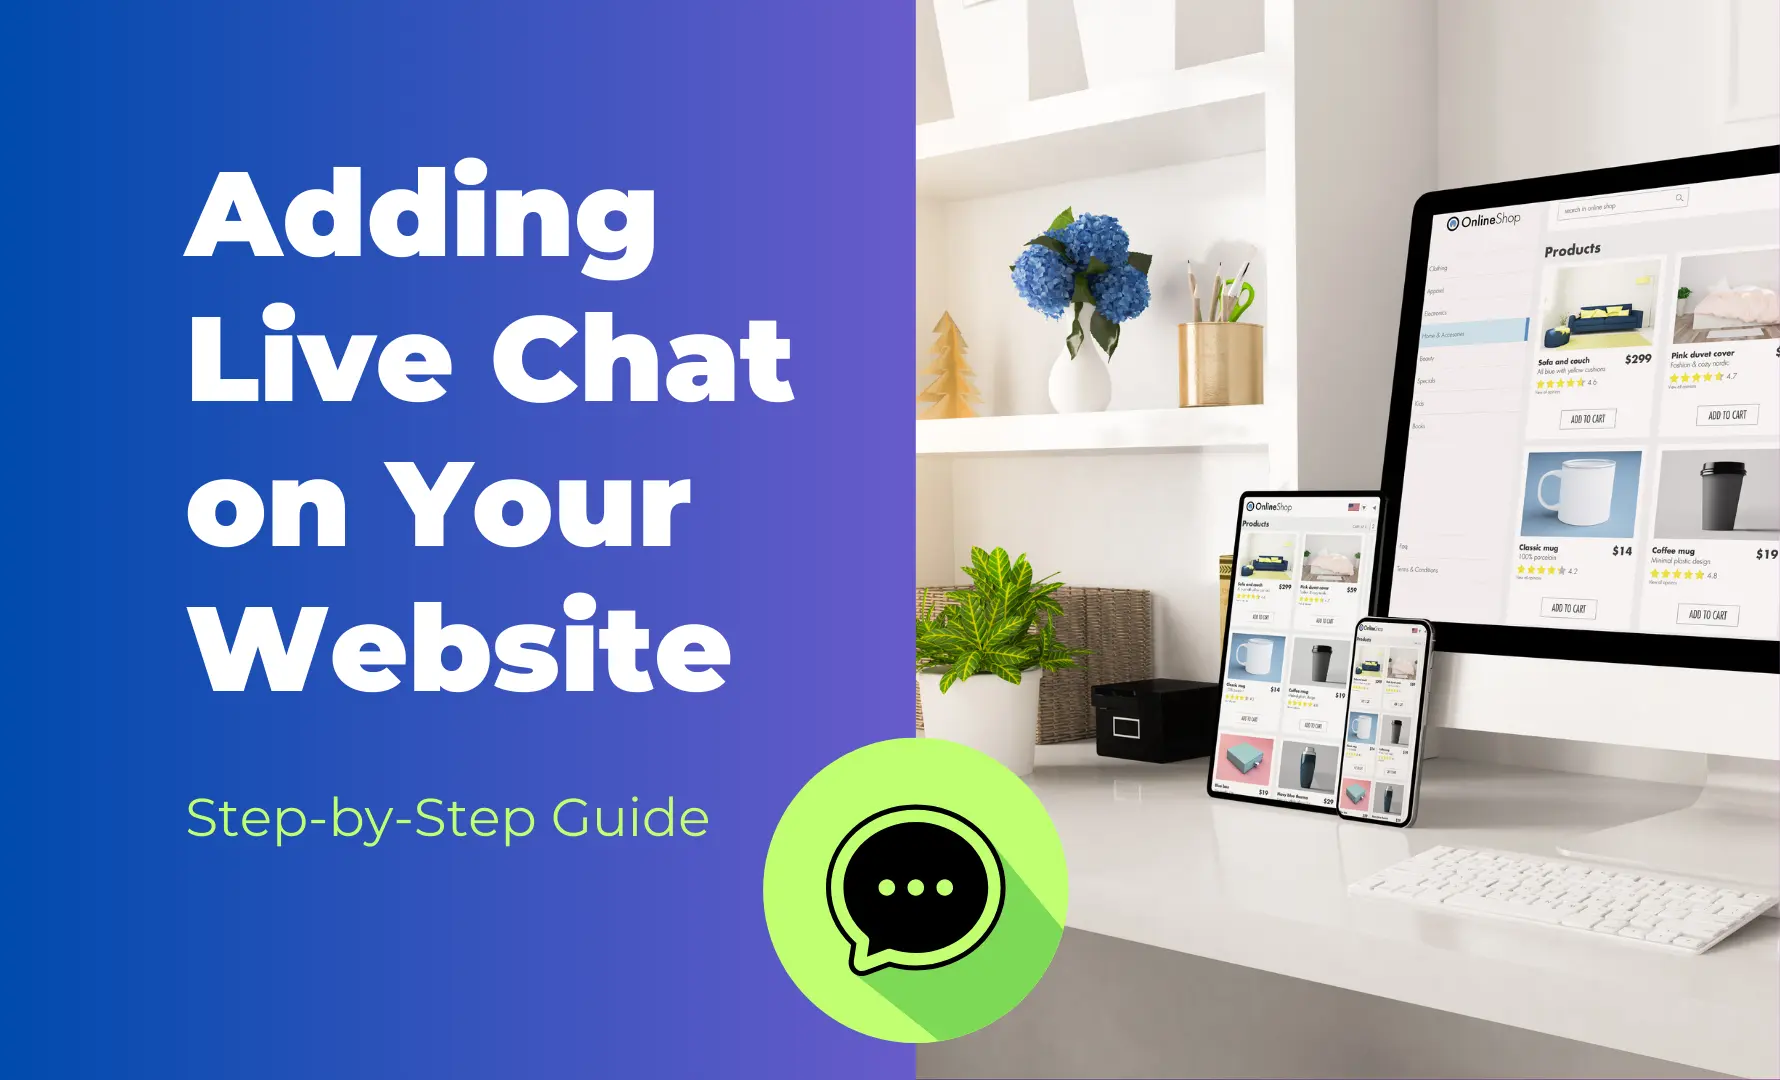 Boost Your Website's Engagement: A Step-by-Step Guide to Adding Live Chat